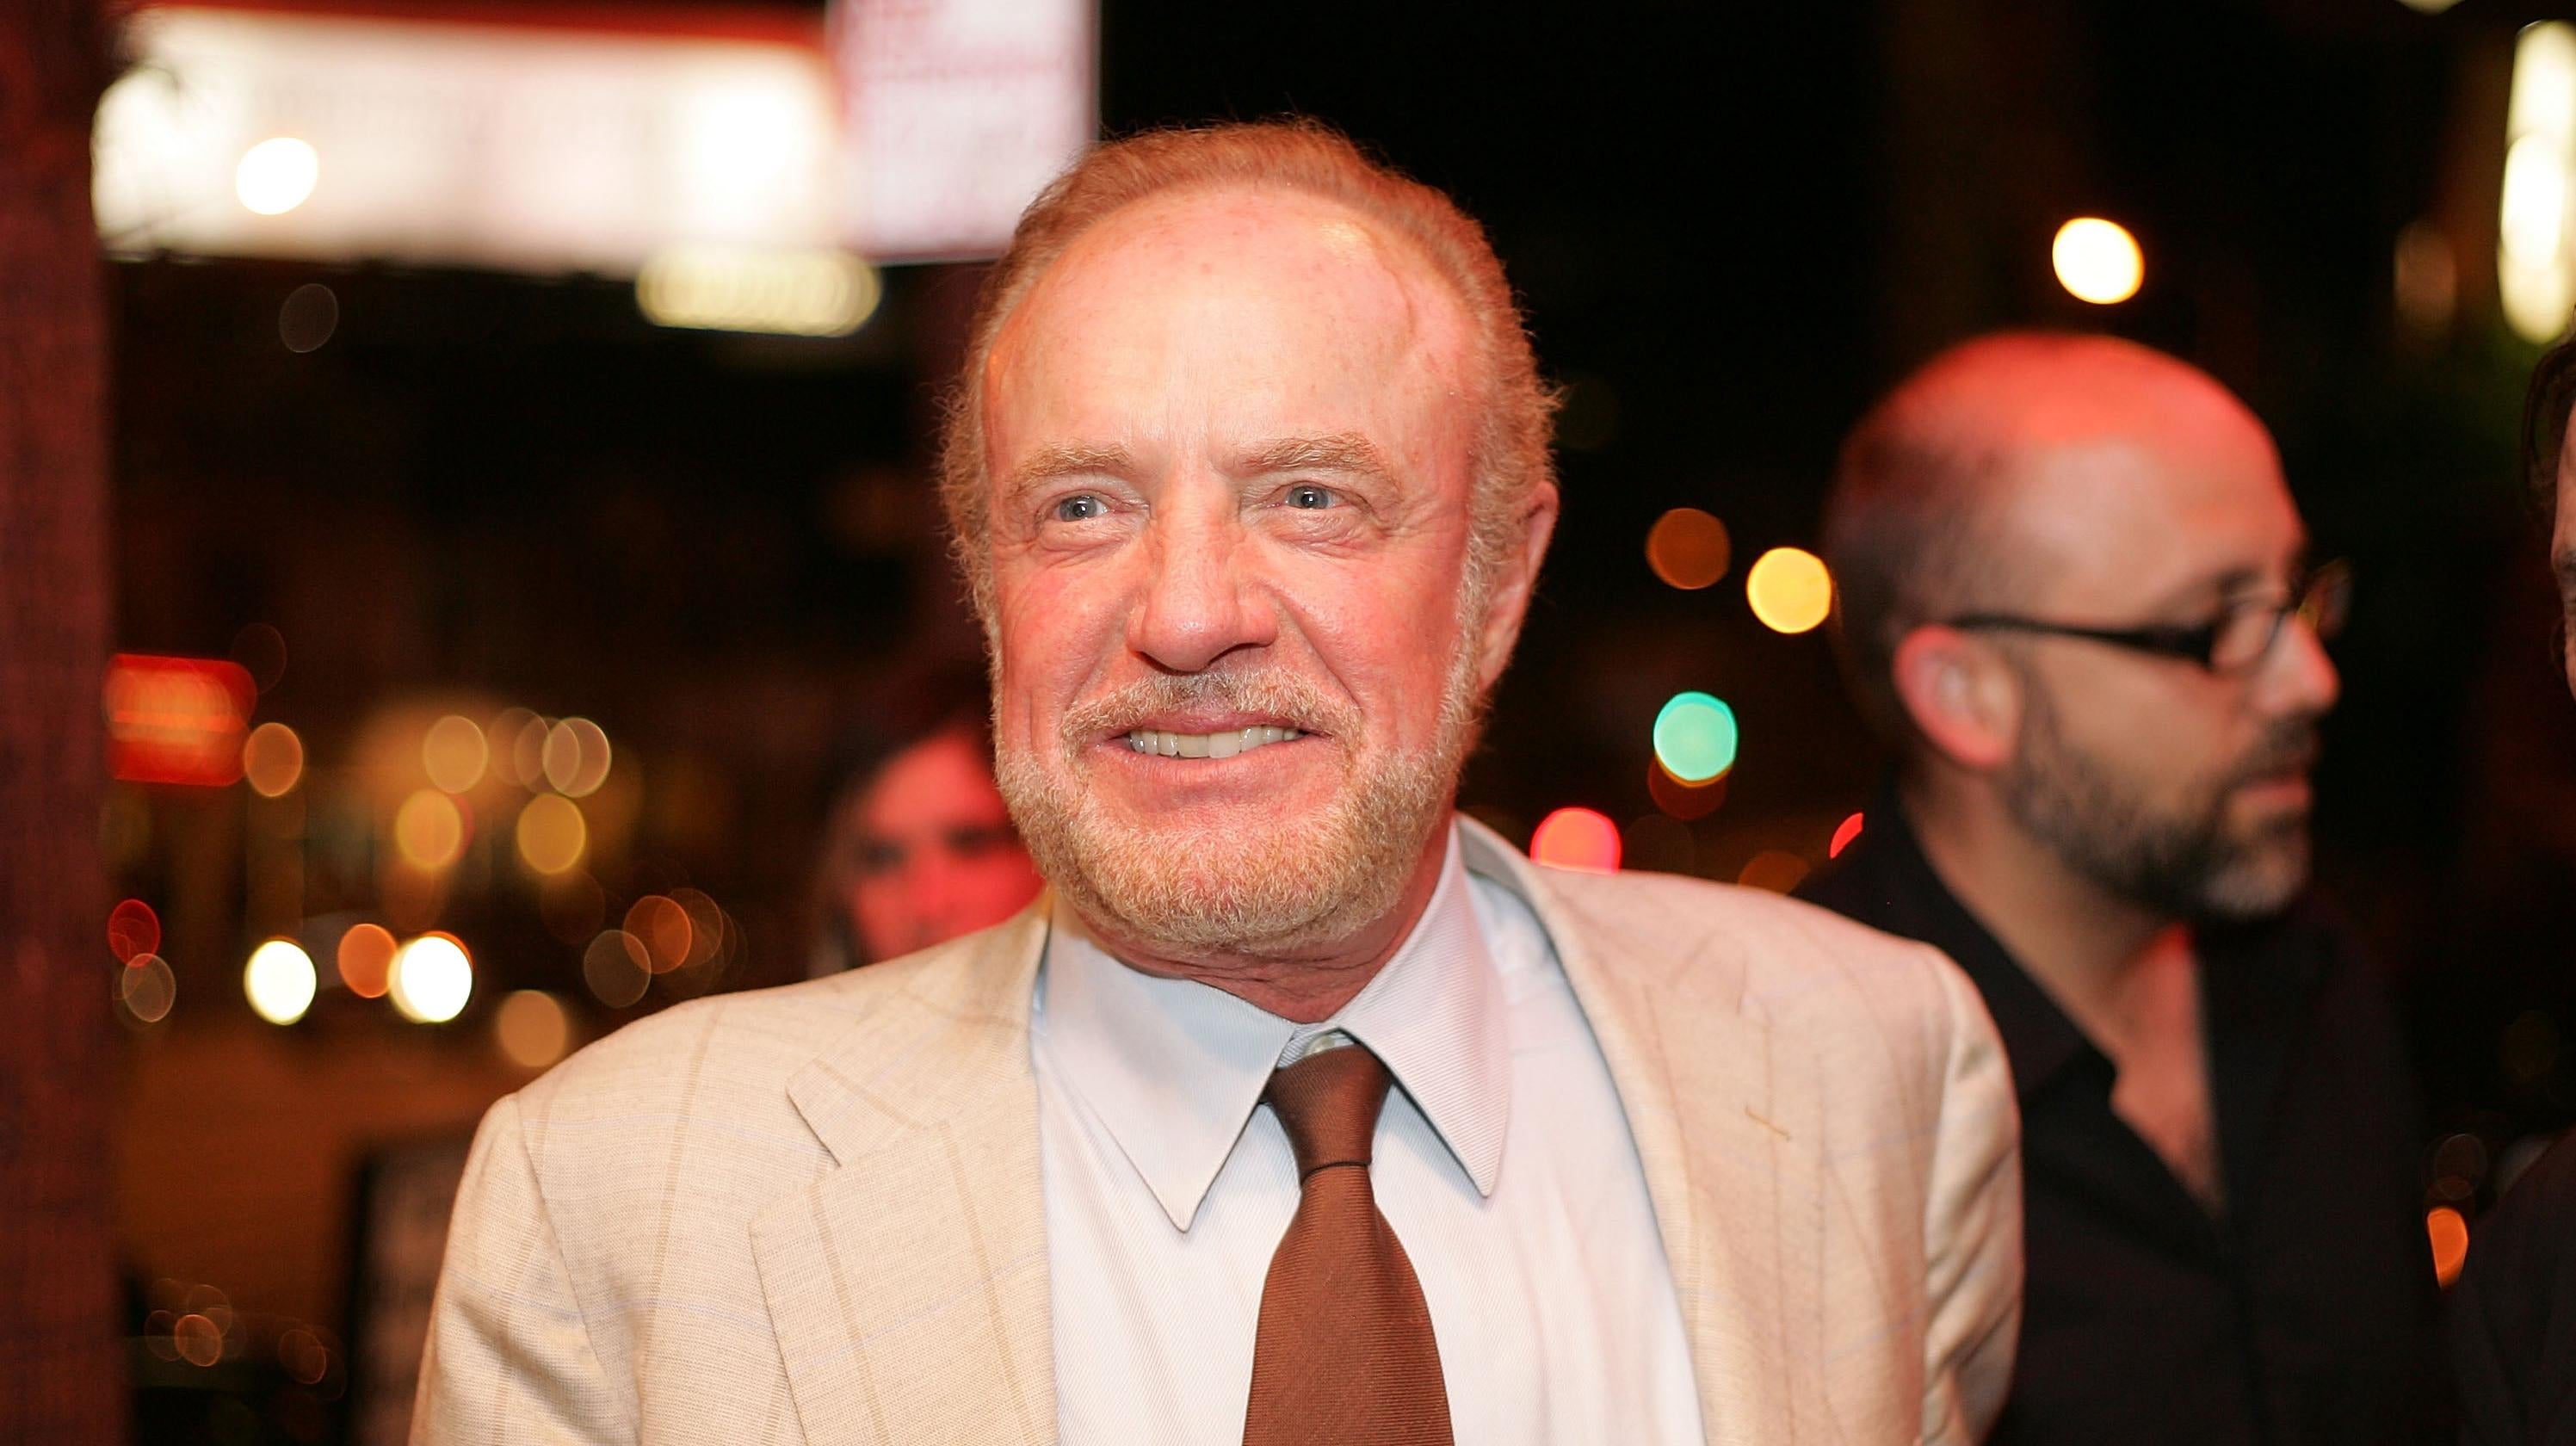 James Caan arrives at the Amoeba Music Spring Tour to benefit the National Multiple Sclerosis Society at the Roxy May 16, 2008 in Los Angeles, California. (Photo: Neilson Barnard, Getty Images)